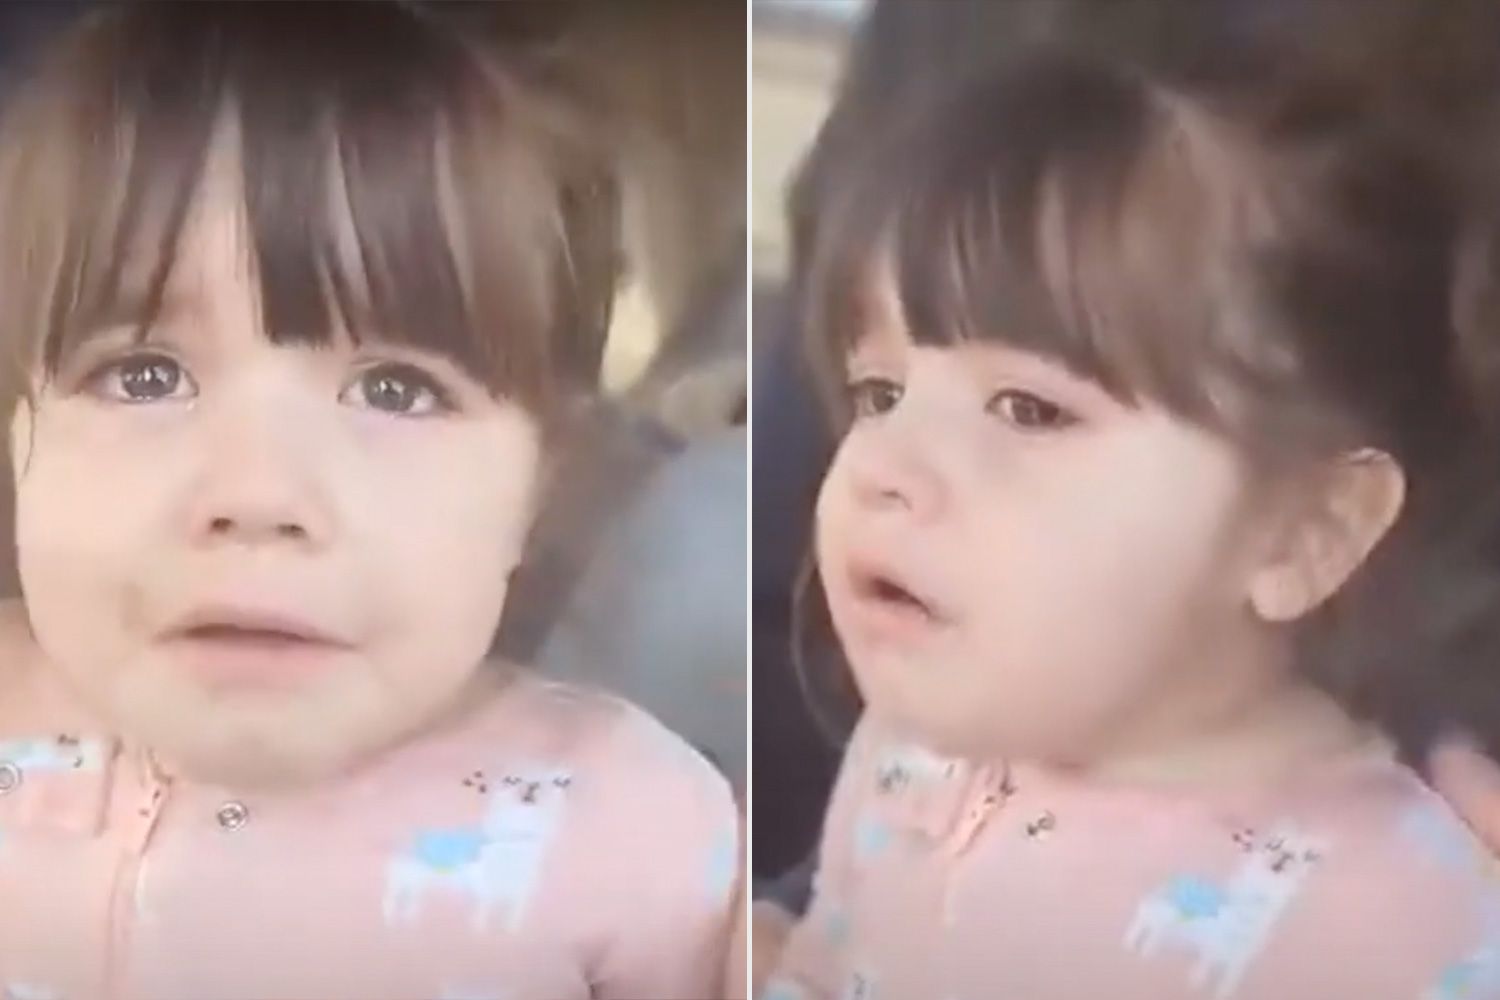  3-Year-Old Cries as She Asks Family What Happened to Their Home, Which Burned Down in Texas Wildfire 